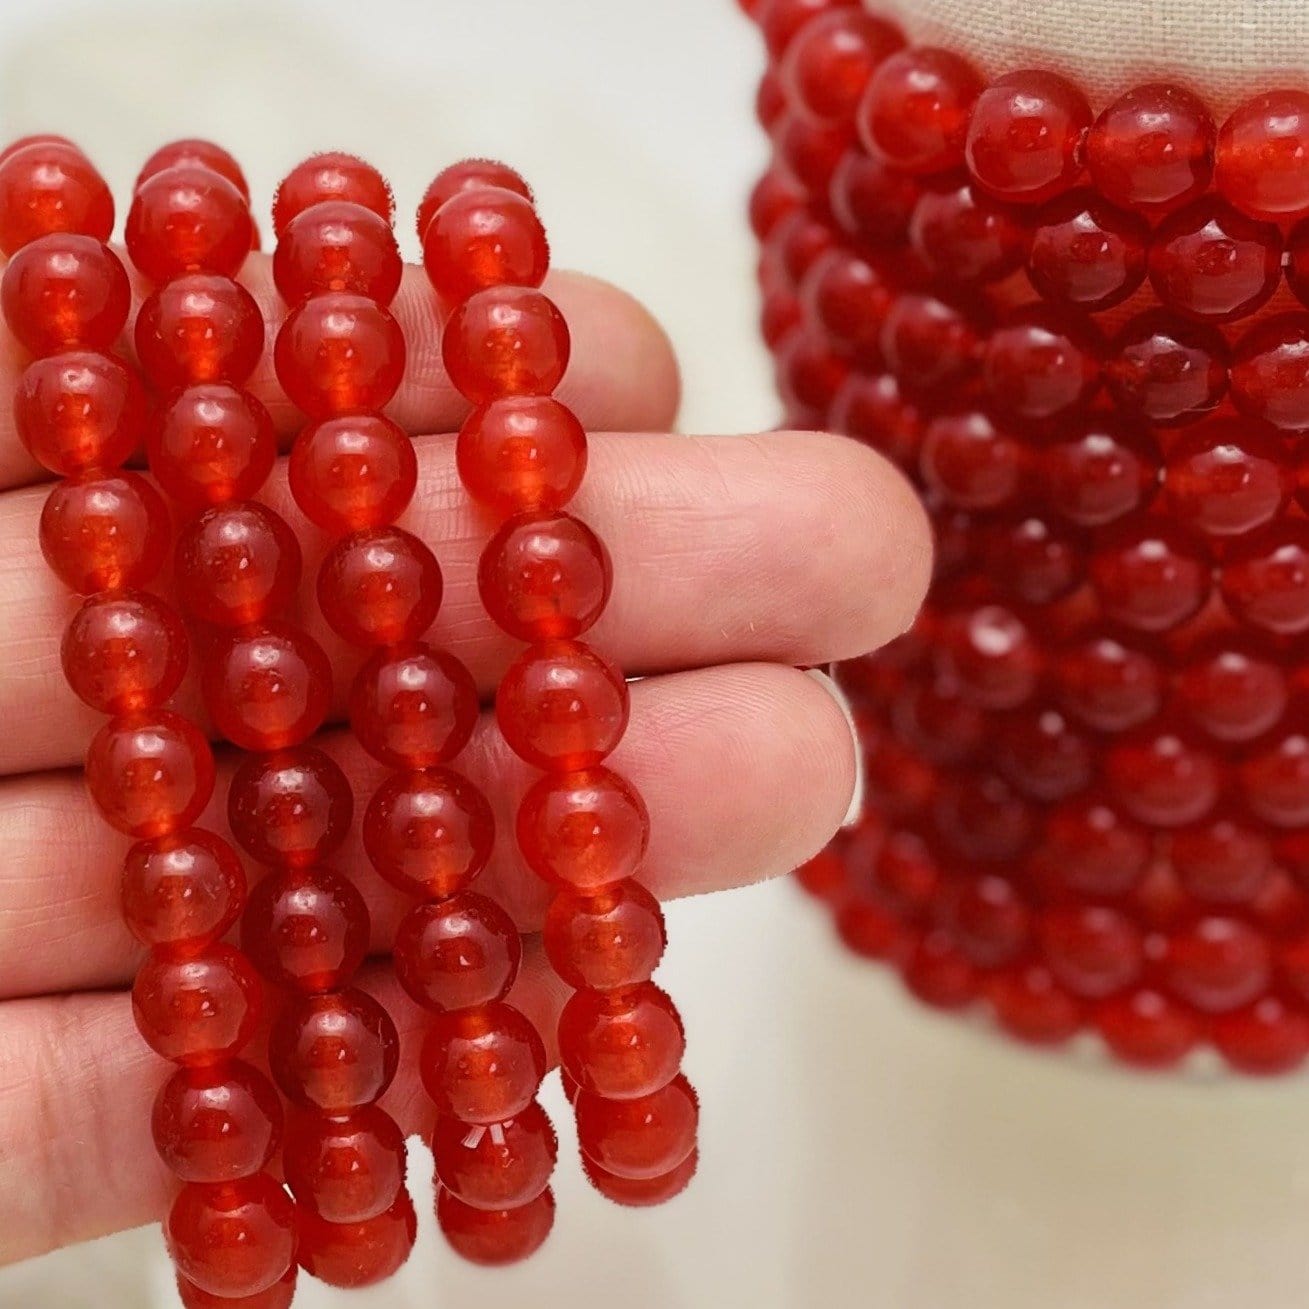 Red Jade Round Bead Bracelet 8mm. These Red Jade bead bracelets are so beautiful and eye catching. They're perfect to use as an accessory or for your meditation time! Also makes a great gift!